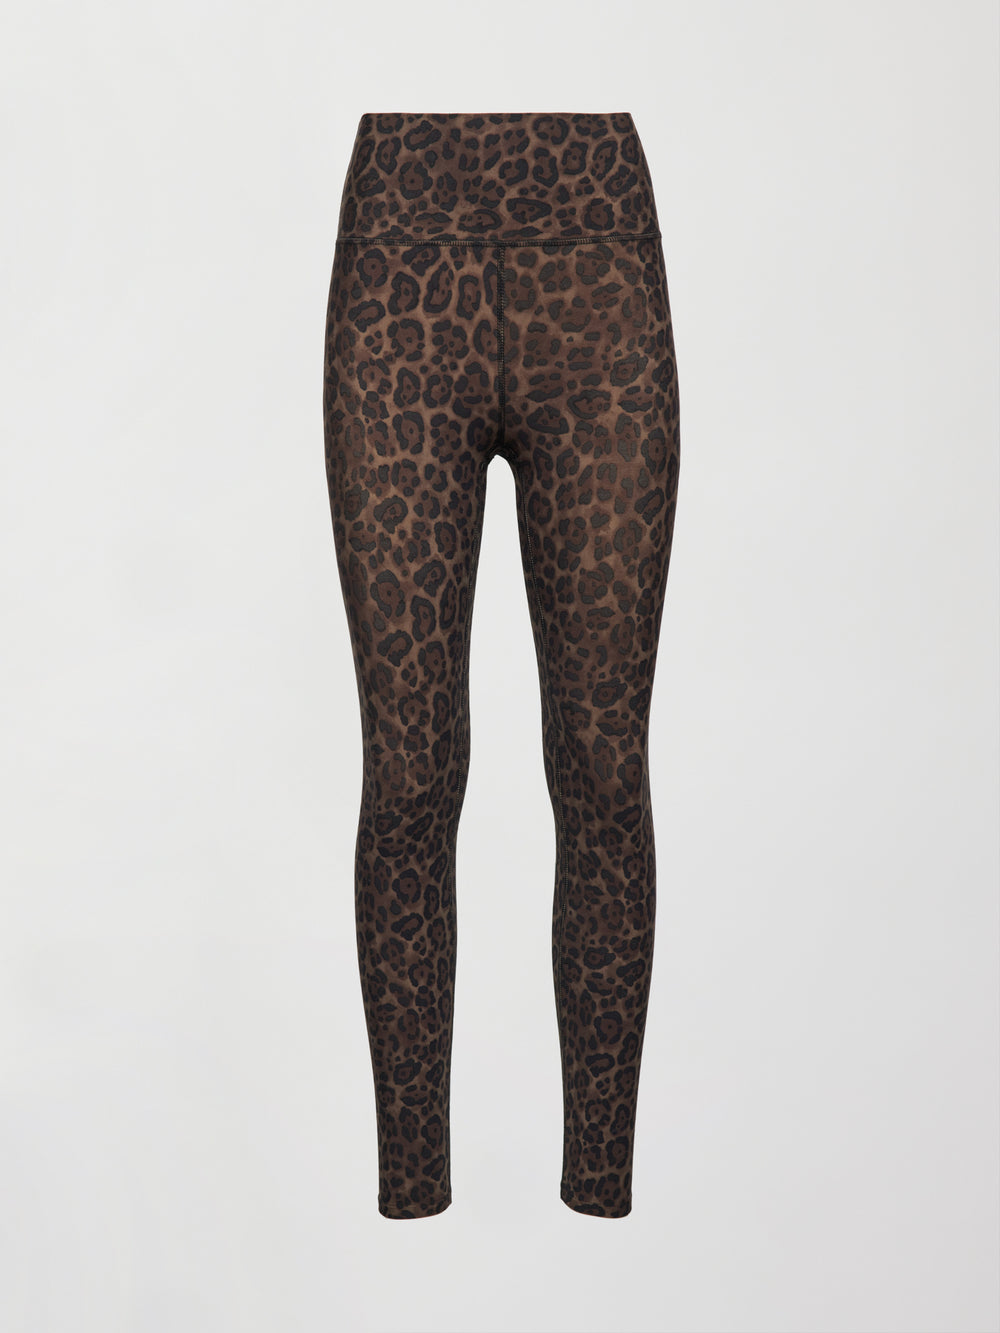 Carbon 38 High Rise Full-length Legging In Leopard Takara Shine – Magenta  Pink - $98 (17% Off Retail) New With Tags - From Edith